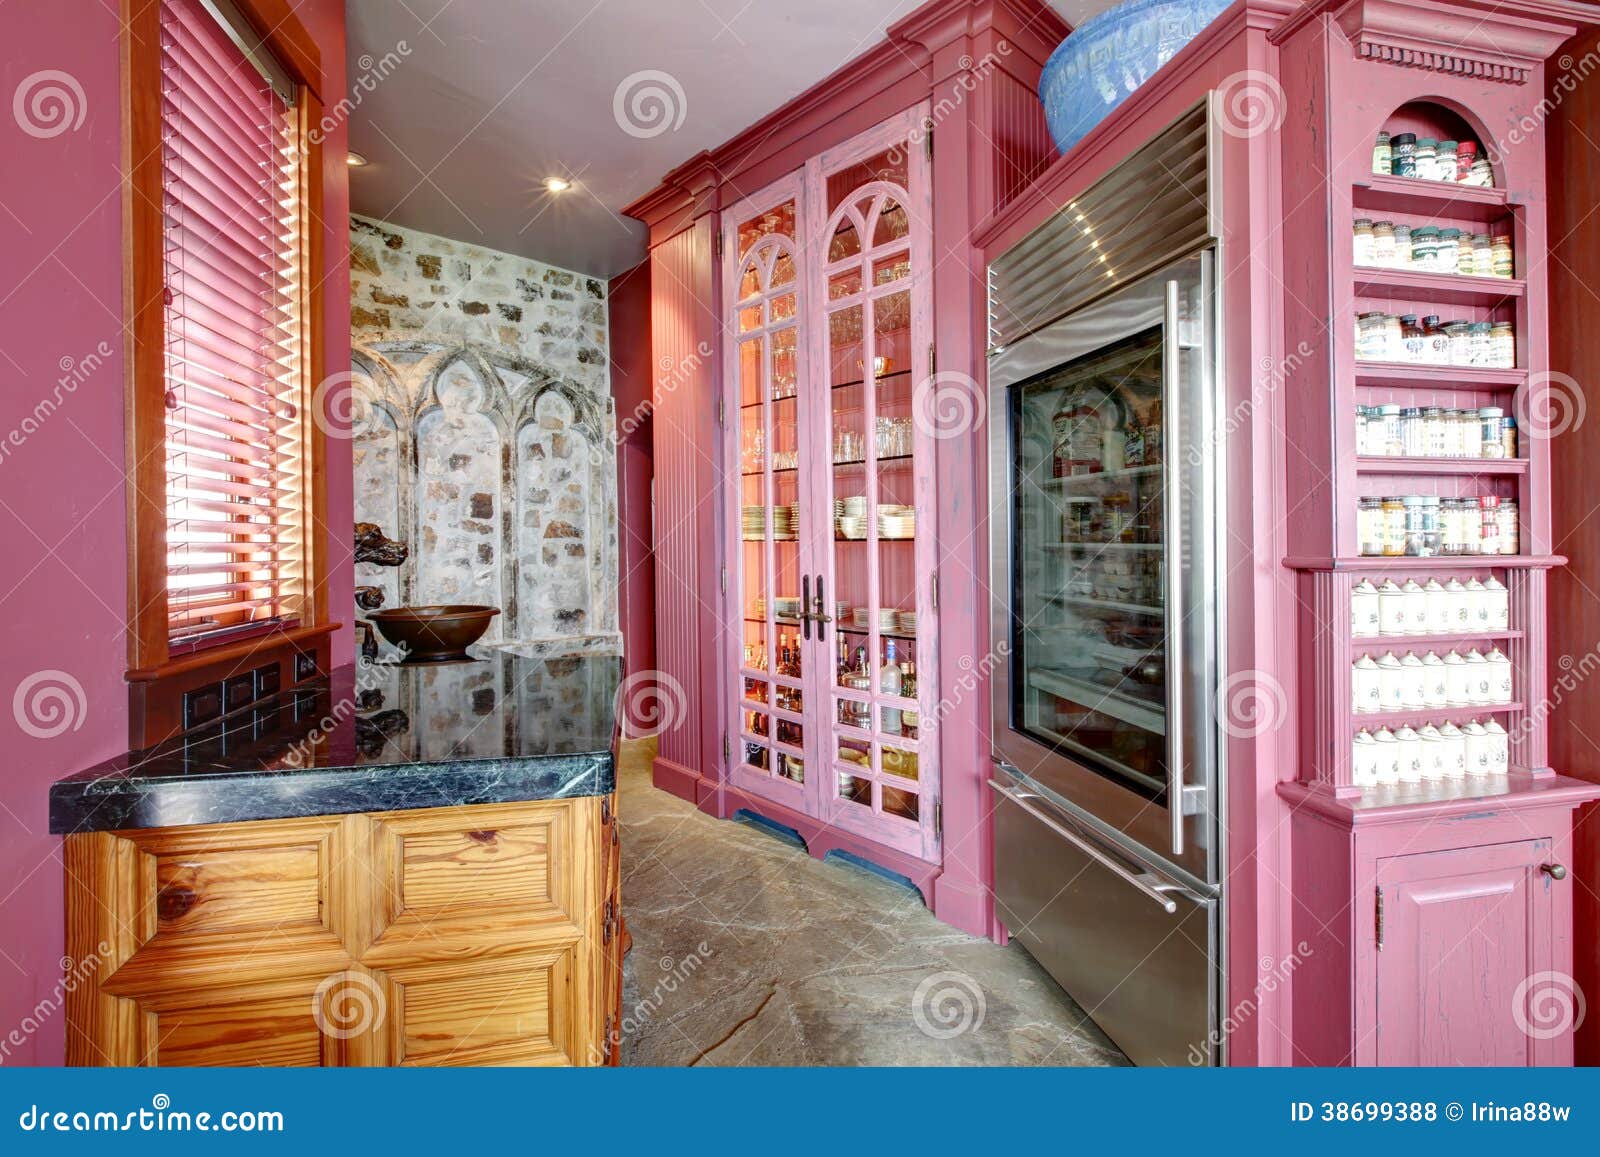 View Of Pink Storage Built Ins Stock Photo Image Of Cabinet